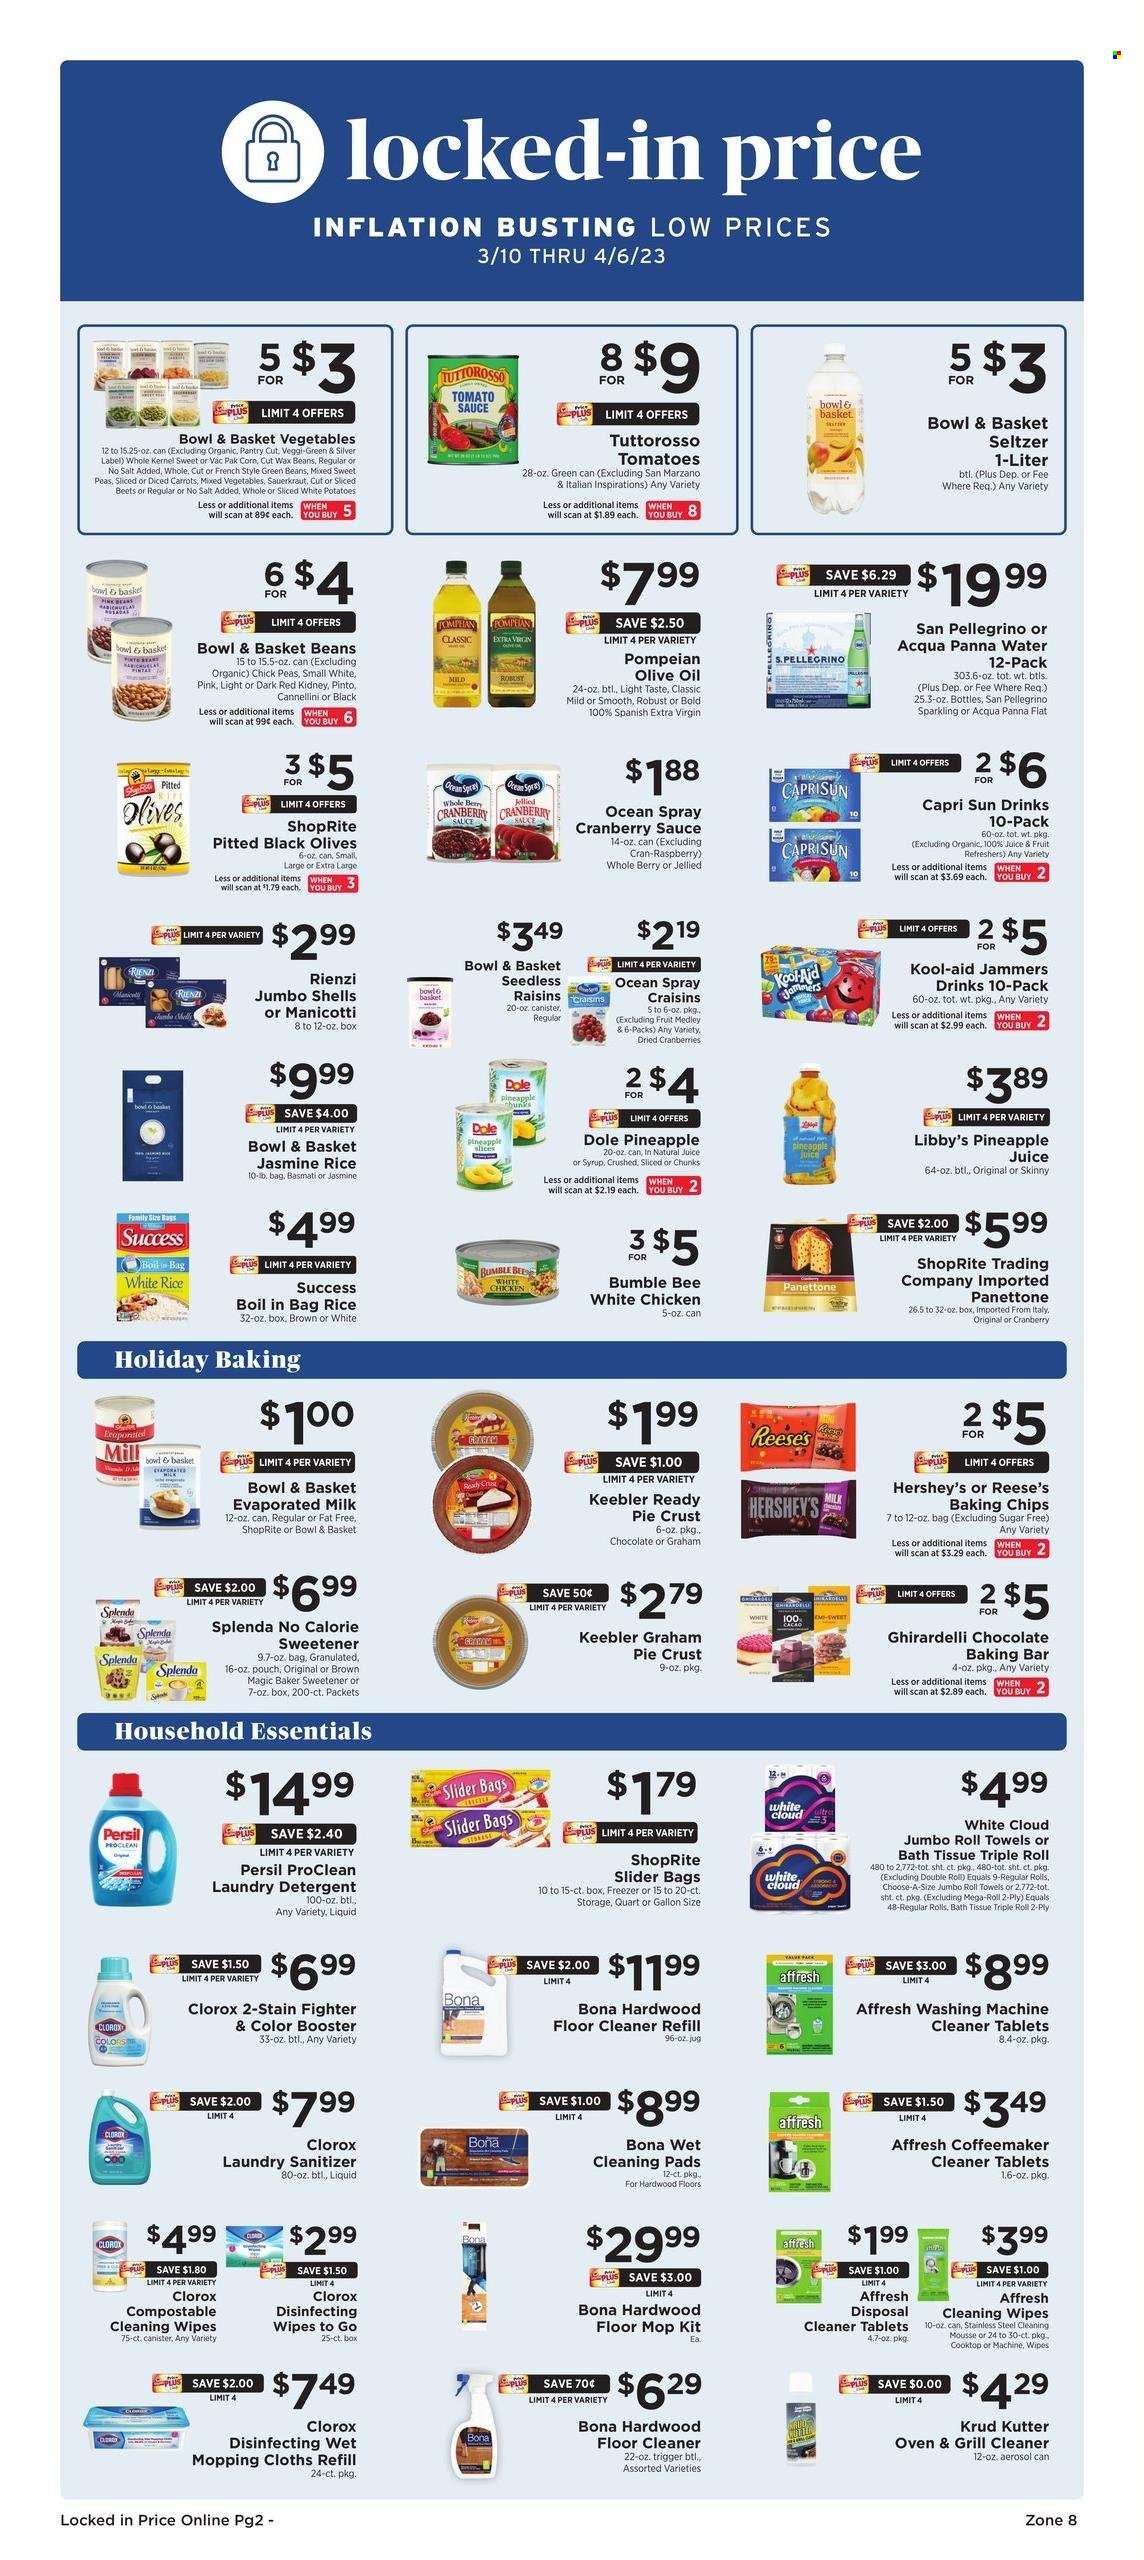 thumbnail - ShopRite Flyer - 03/24/2023 - 03/30/2023 - Sales products - Bowl & Basket, panettone, corn, green beans, tomatoes, potatoes, Dole, pineapple, Bumble Bee, sauce, evaporated milk, Reese's, Hershey's, mixed vegetables, chocolate, Ghirardelli, Keebler, pie crust, baking chips, sweetener, craisins, sauerkraut, tomato sauce, olives, basmati rice, rice, jasmine rice, white rice, extra virgin olive oil, olive oil, oil, cranberry sauce, raisins, dried fruit, Capri Sun, pineapple juice, juice, seltzer water, San Pellegrino, water, cleansing wipes, wipes, bath tissue, paper towels, detergent, cleaner, floor cleaner, washing machine cleaner, Clorox, cleaning pad, Persil, laundry detergent, mop. Page 15.